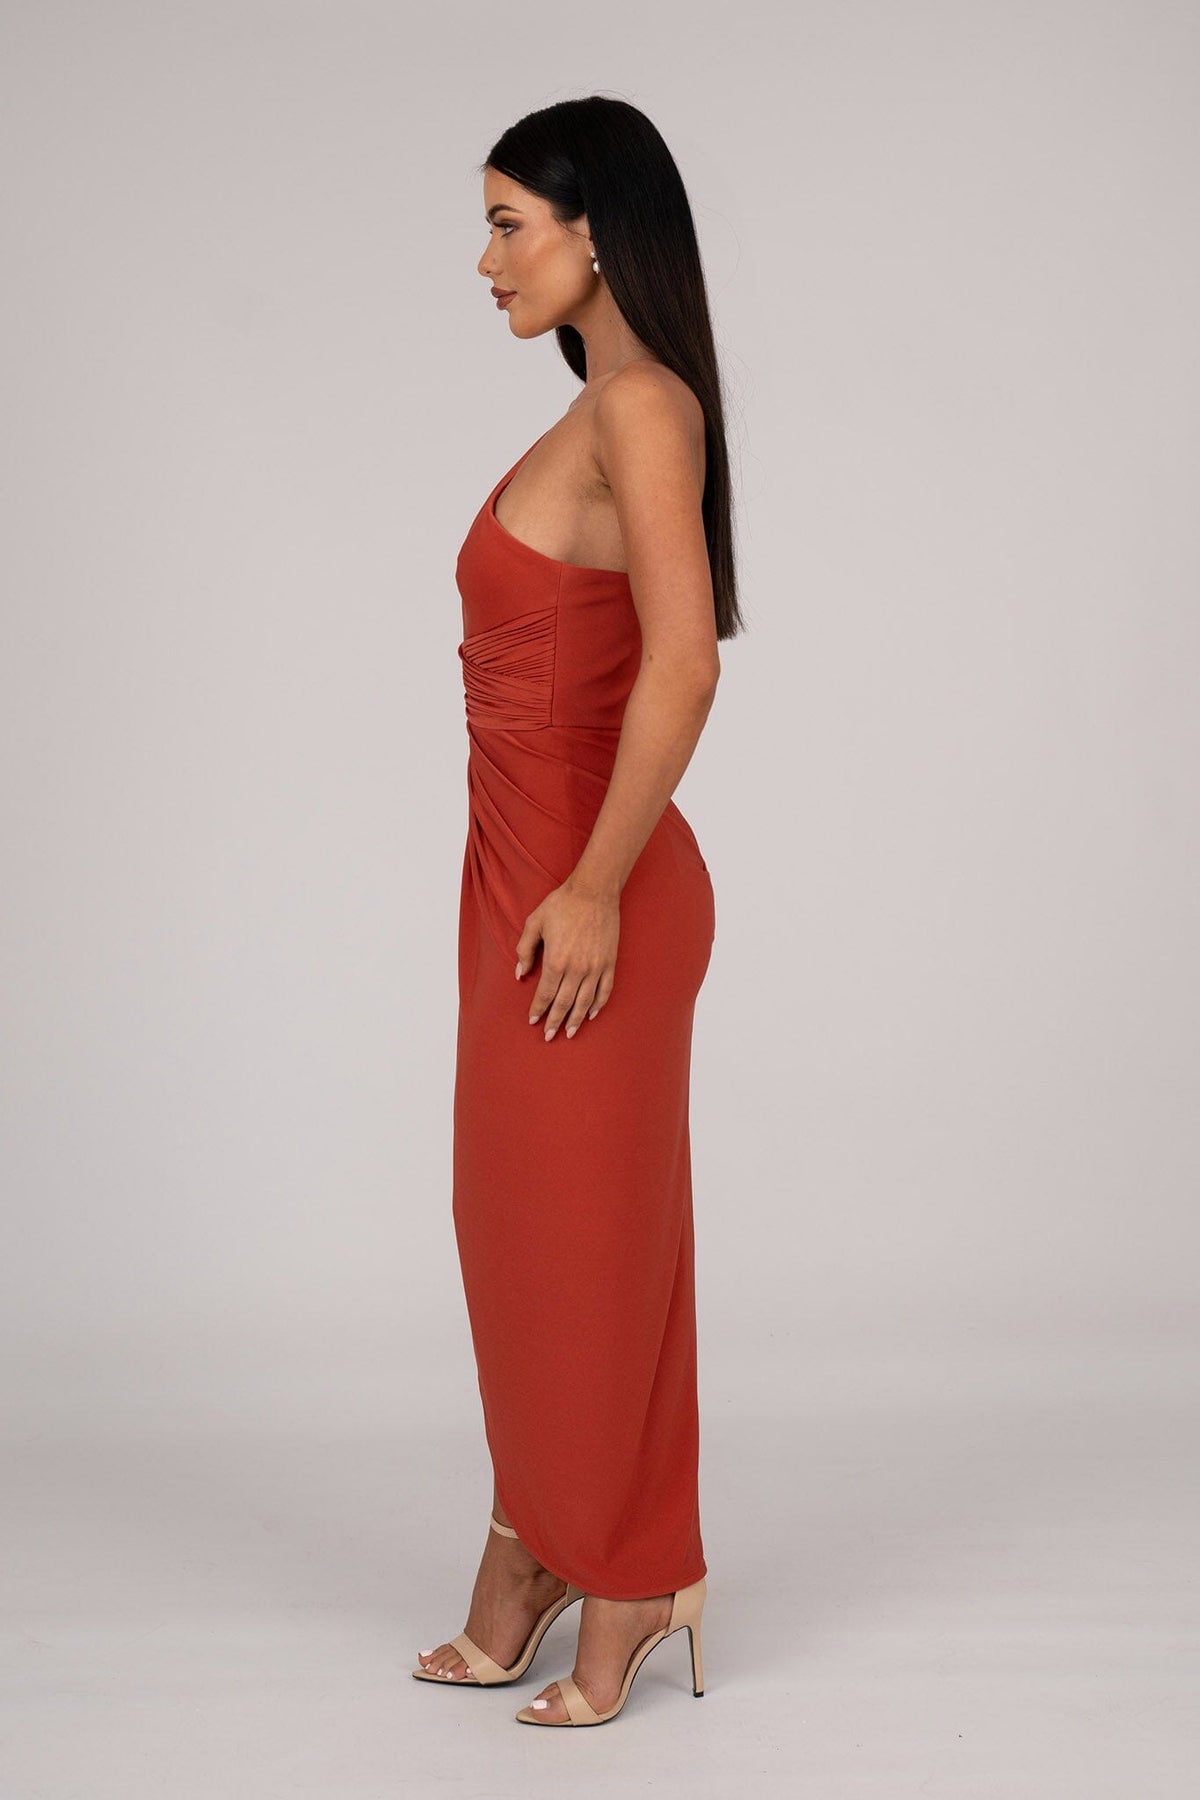 Side Image of Burnt Orange Midi Dress with One Shoulder Neckline, Faux-wrap Front Design and Asymmetrical Skirt with Centre Front Split